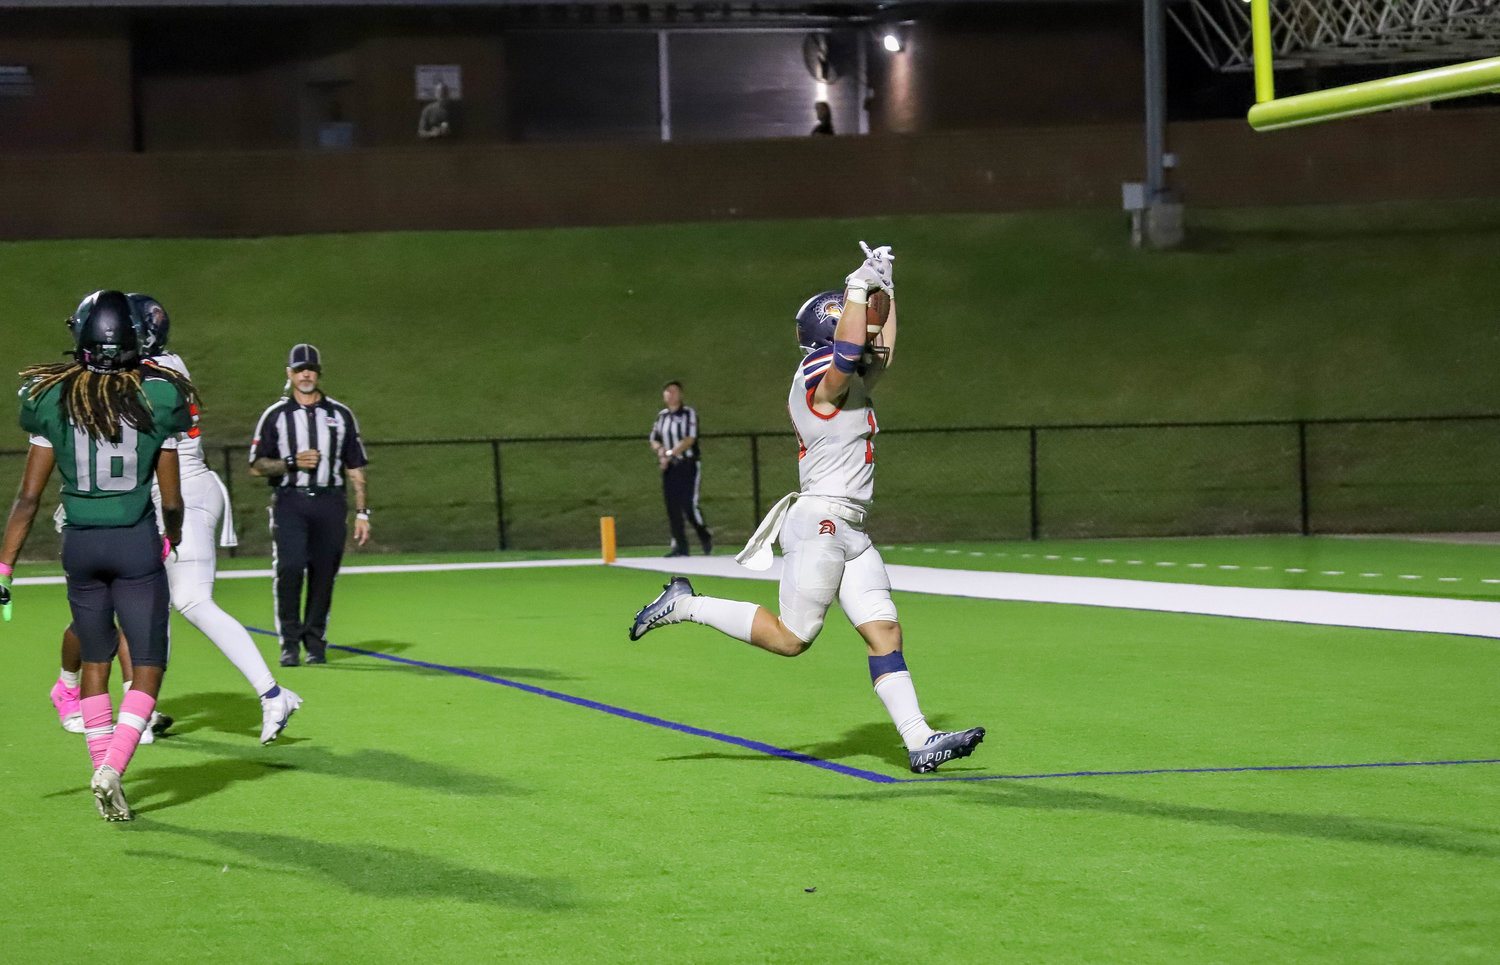 Seven Lakes' Jake Farris scores a touchdown during Friday's game between Seven Lakes and Mayde Creek at Rhodes Stadium.